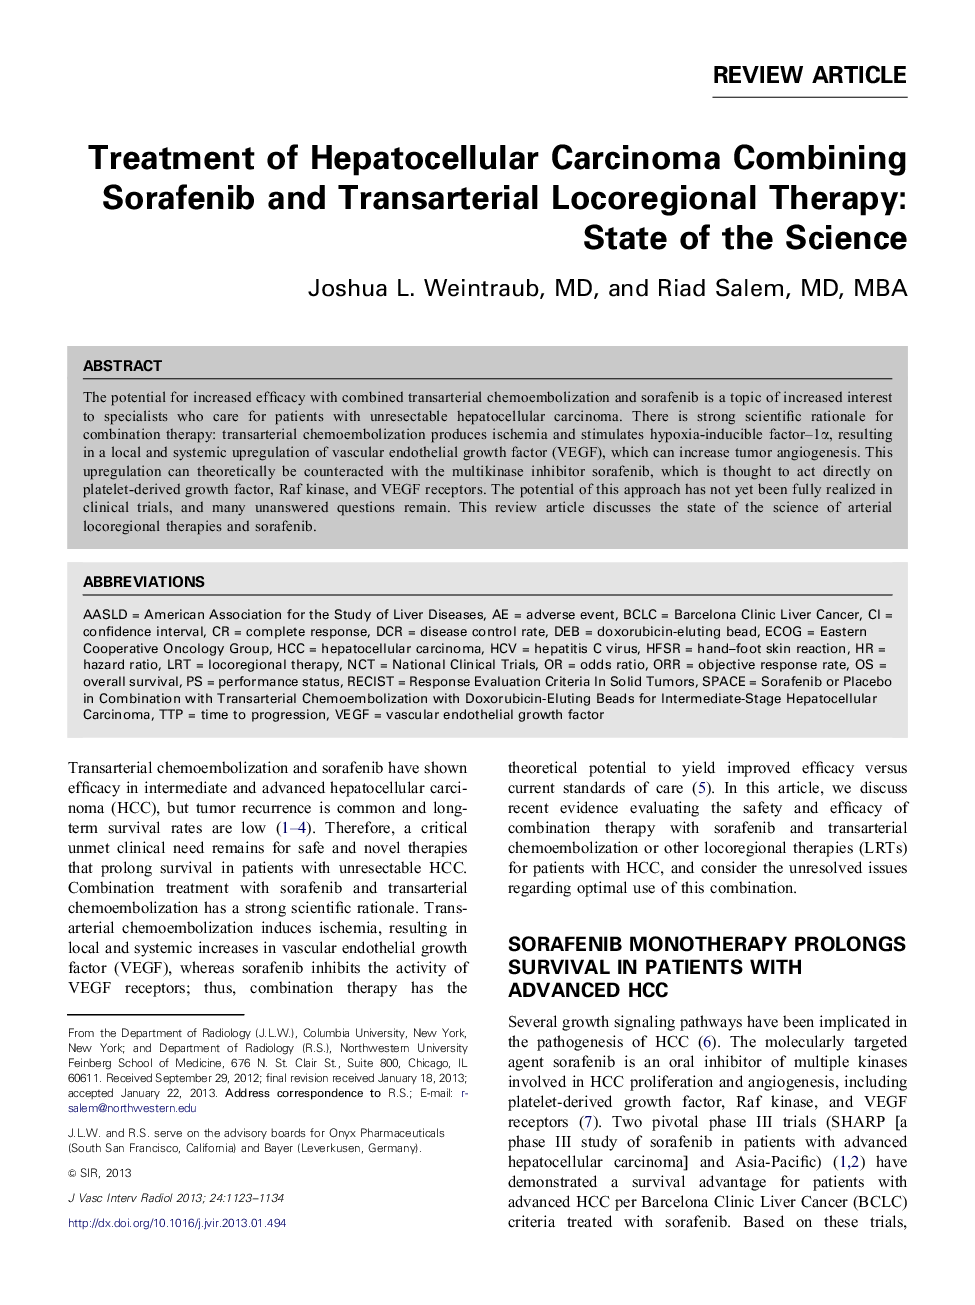 Treatment of Hepatocellular Carcinoma Combining Sorafenib and Transarterial Locoregional Therapy: State of the Science